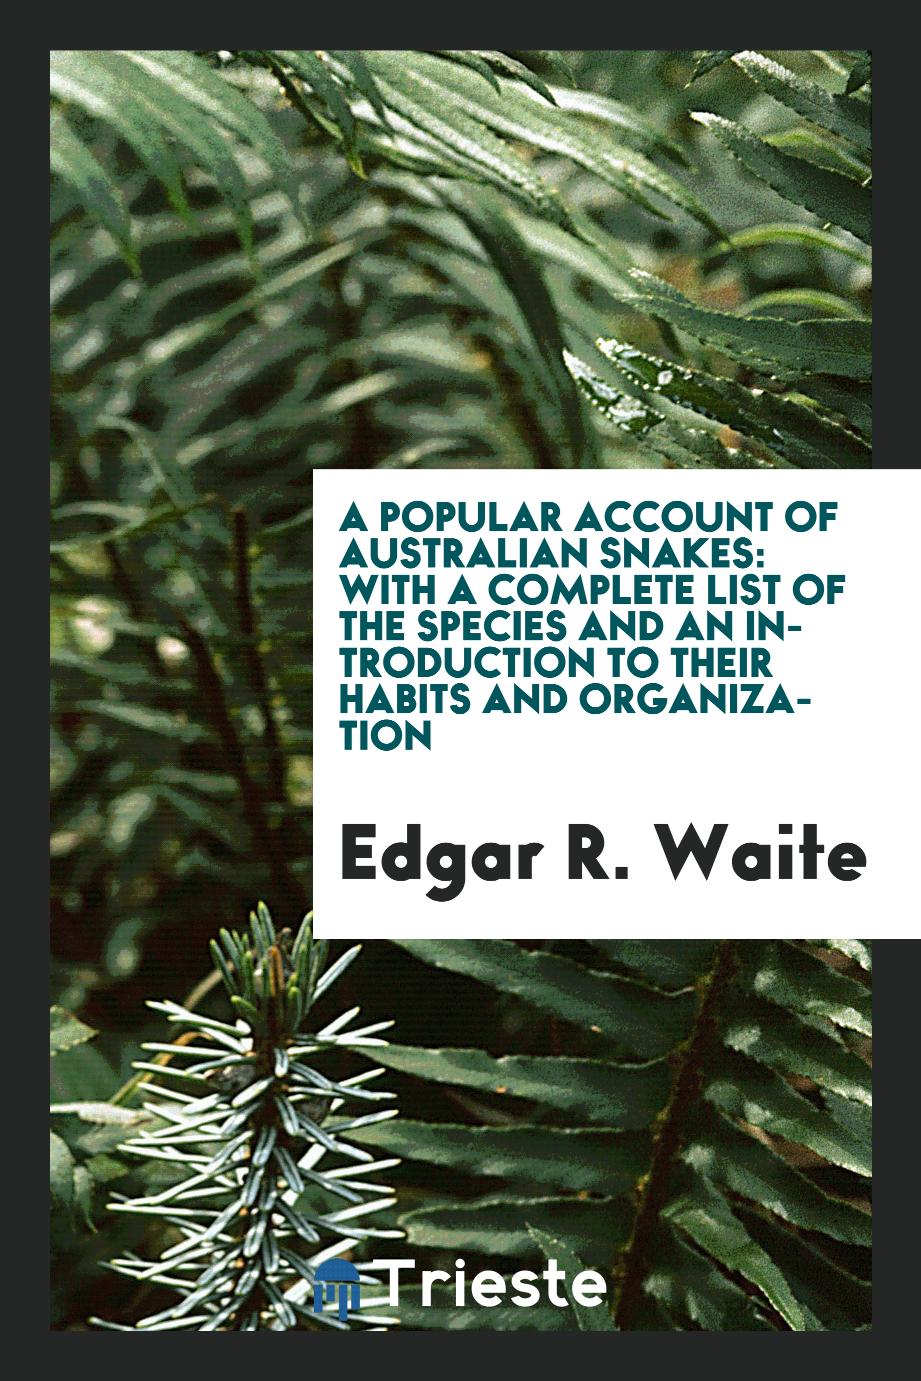 A popular account of Australian snakes: with a complete list of the species and an introduction to their habits and organization